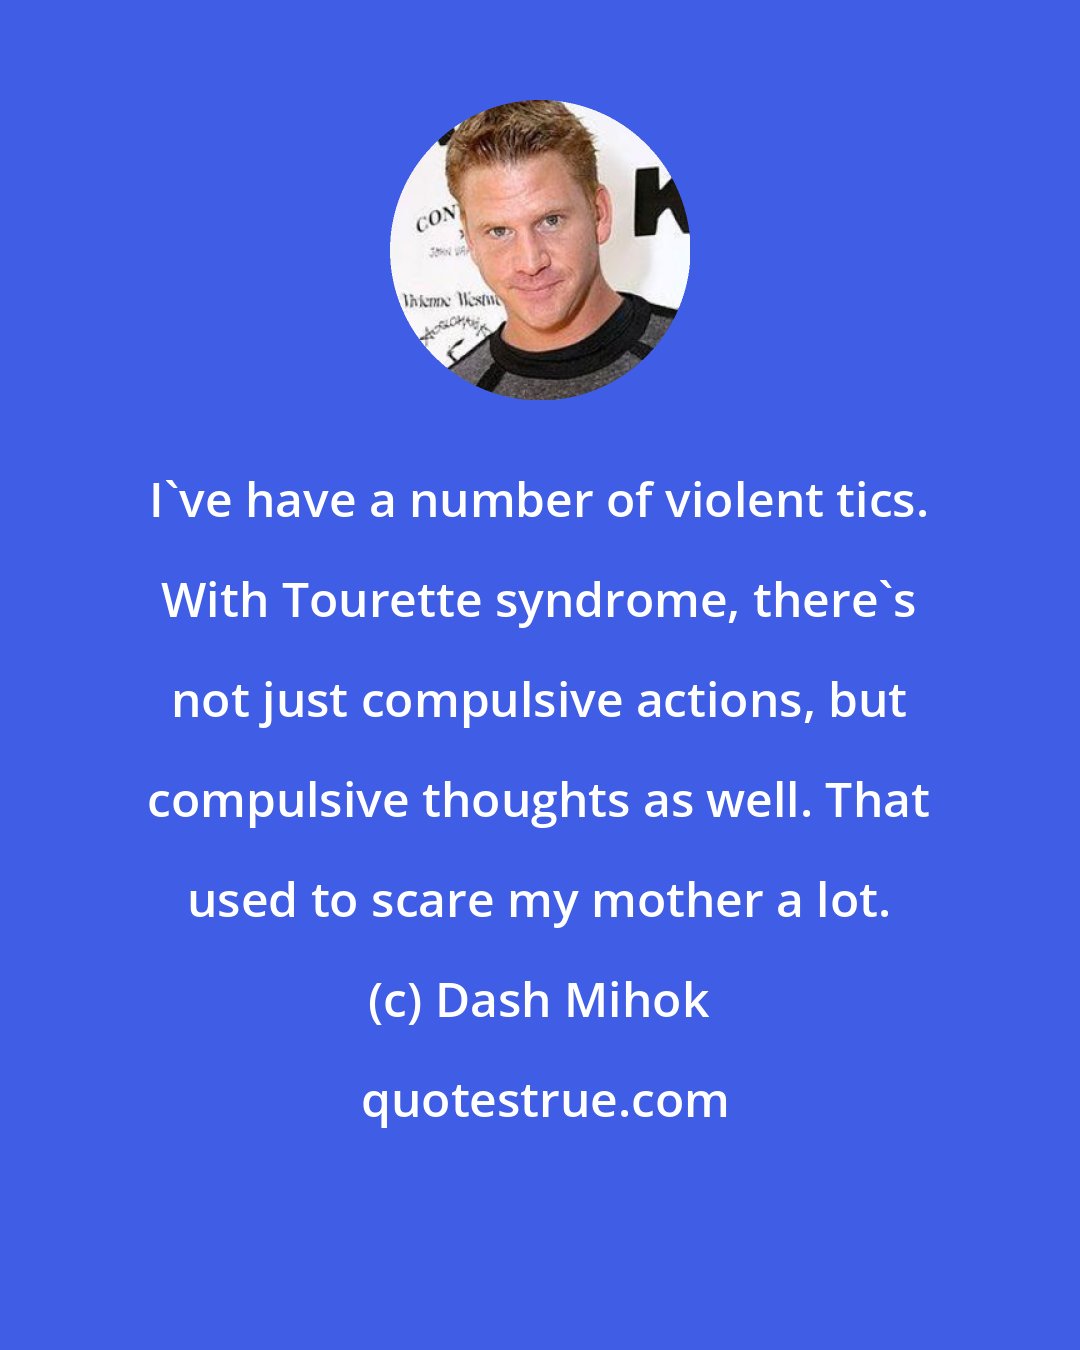 Dash Mihok: I've have a number of violent tics. With Tourette syndrome, there's not just compulsive actions, but compulsive thoughts as well. That used to scare my mother a lot.